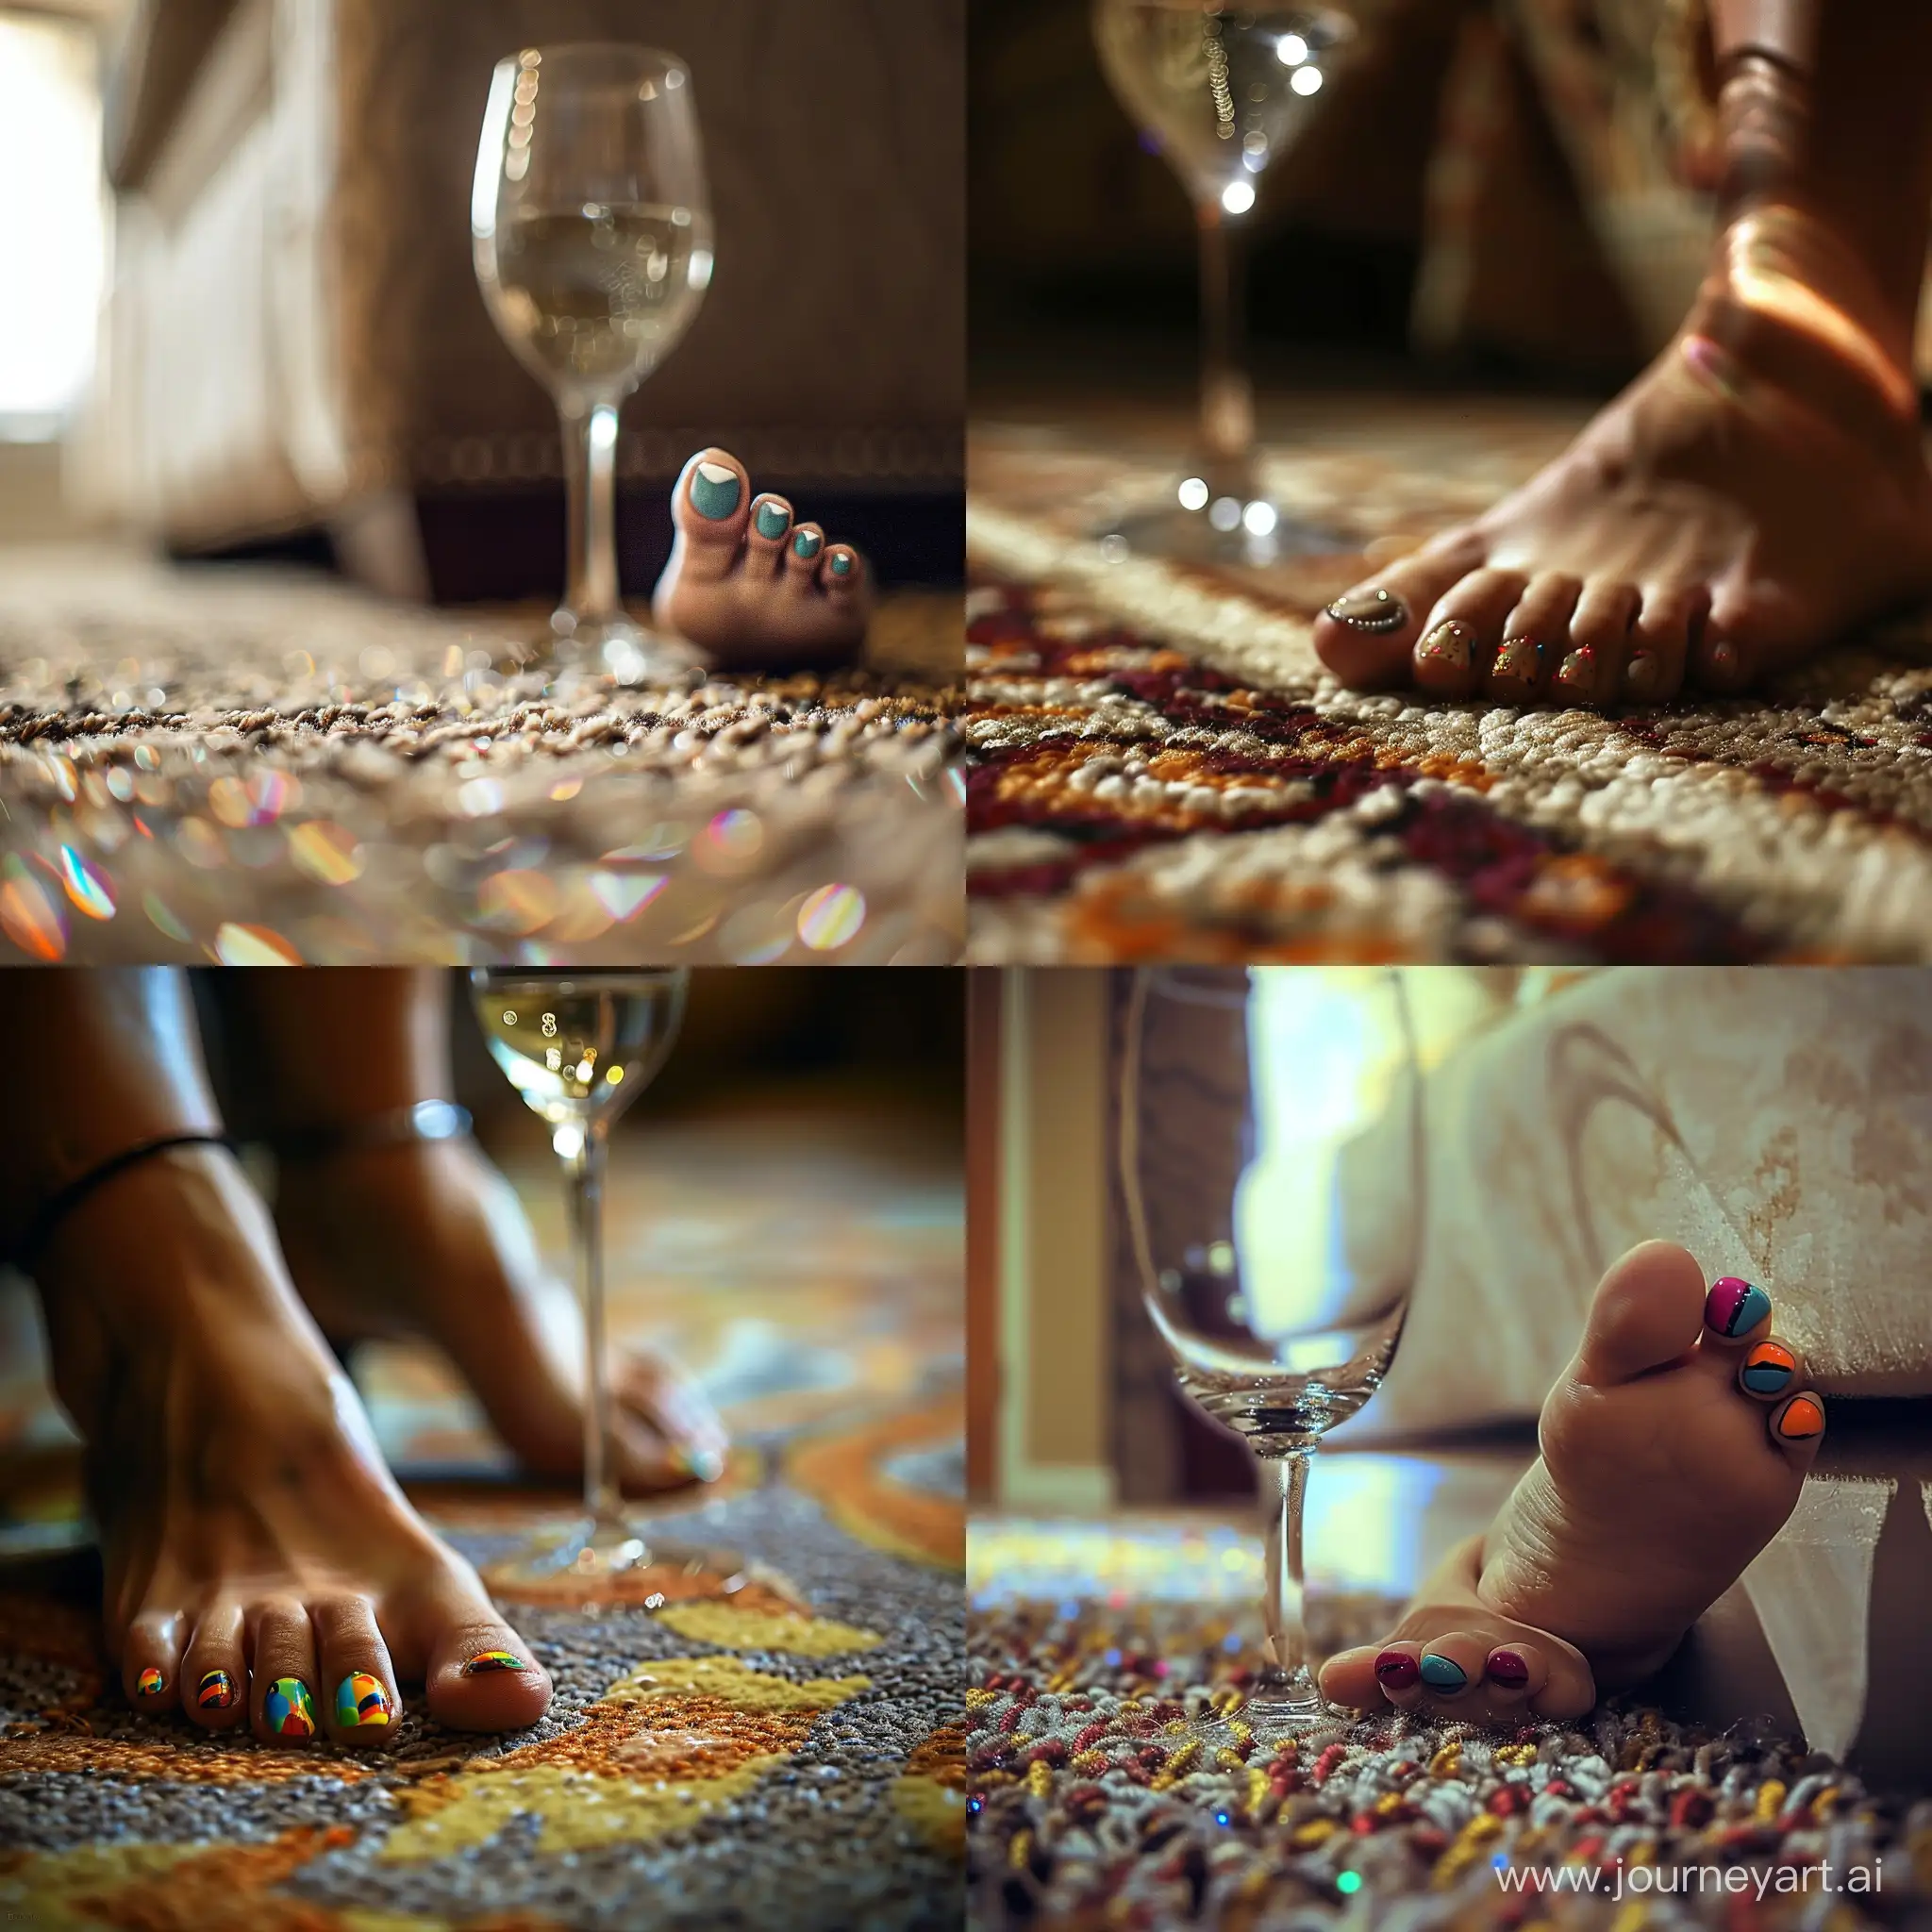 painted toenails, one holding a wine glass, the other leaning against a carpeted floor, the Bokeh effect 